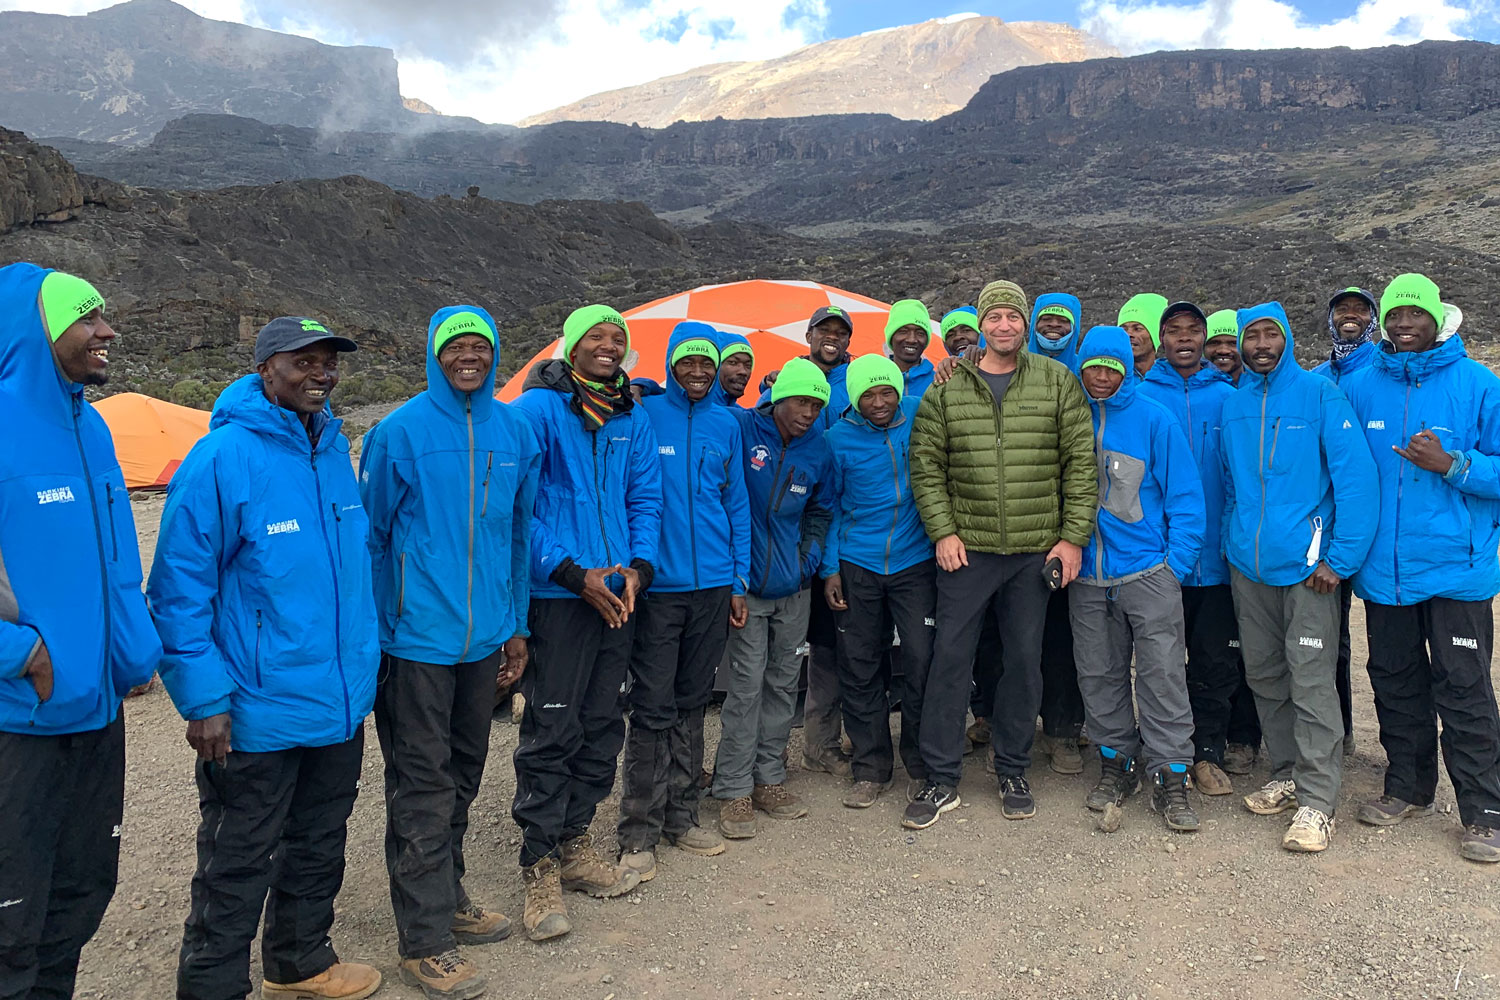 The best Kilimanjaro guides and crew at Moir camp